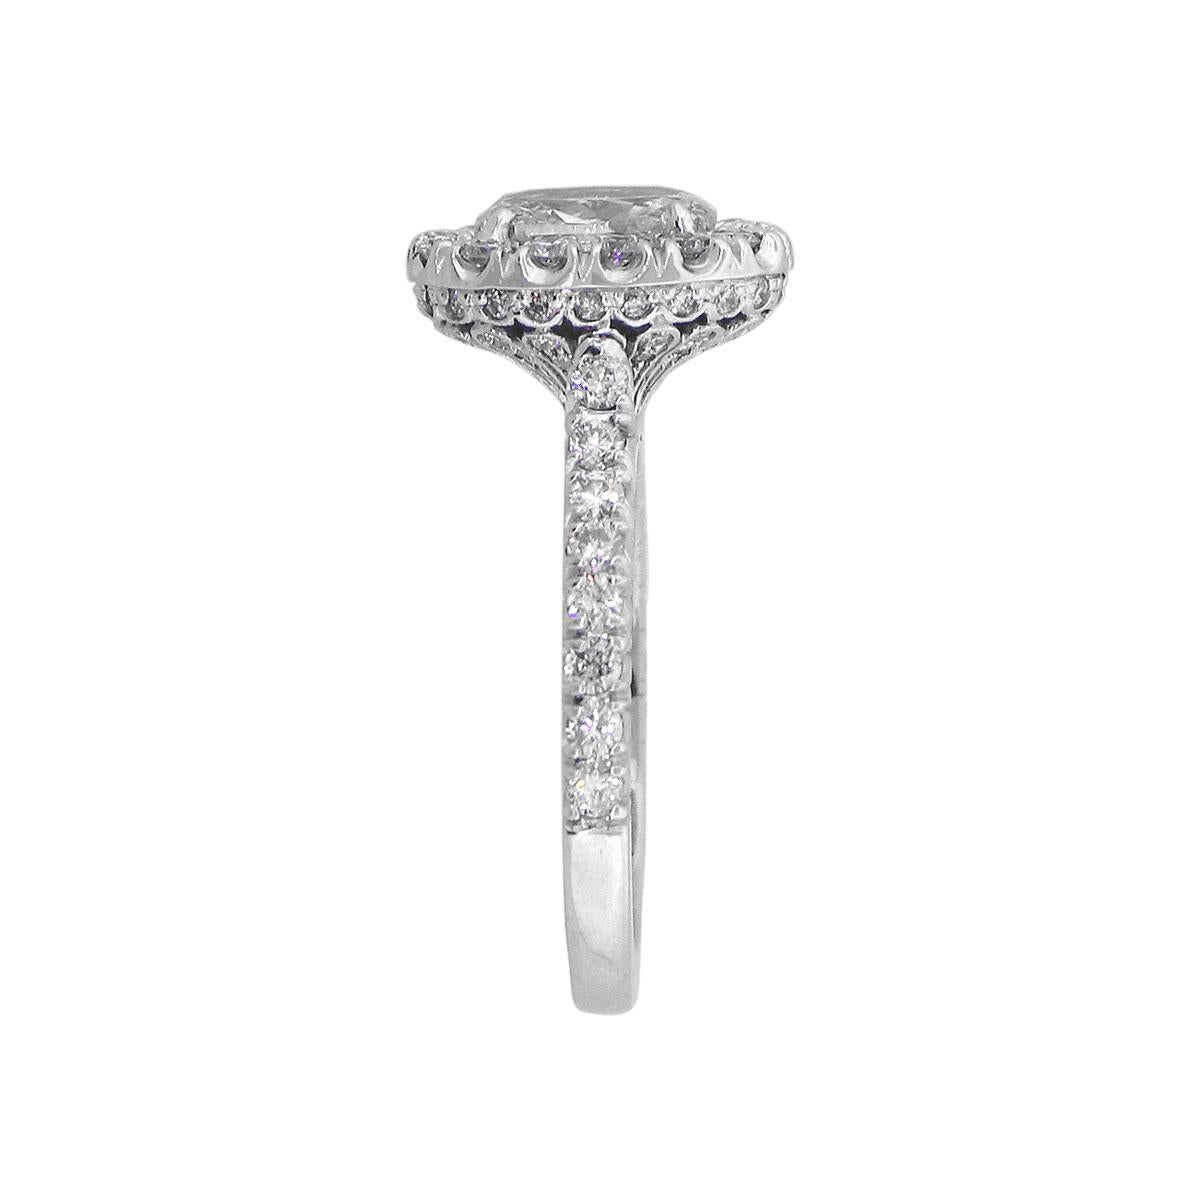 Material: 14k White Gold
Center Diamond Details: Approx. 0.96ct Oval cut diamond. Diamond is J-K in color and SI2 in clarity
Adjacent Diamond Details: Approx. 0.75ct of round cut diamonds. Diamonds are G/H in color and VS in clarity
Ring